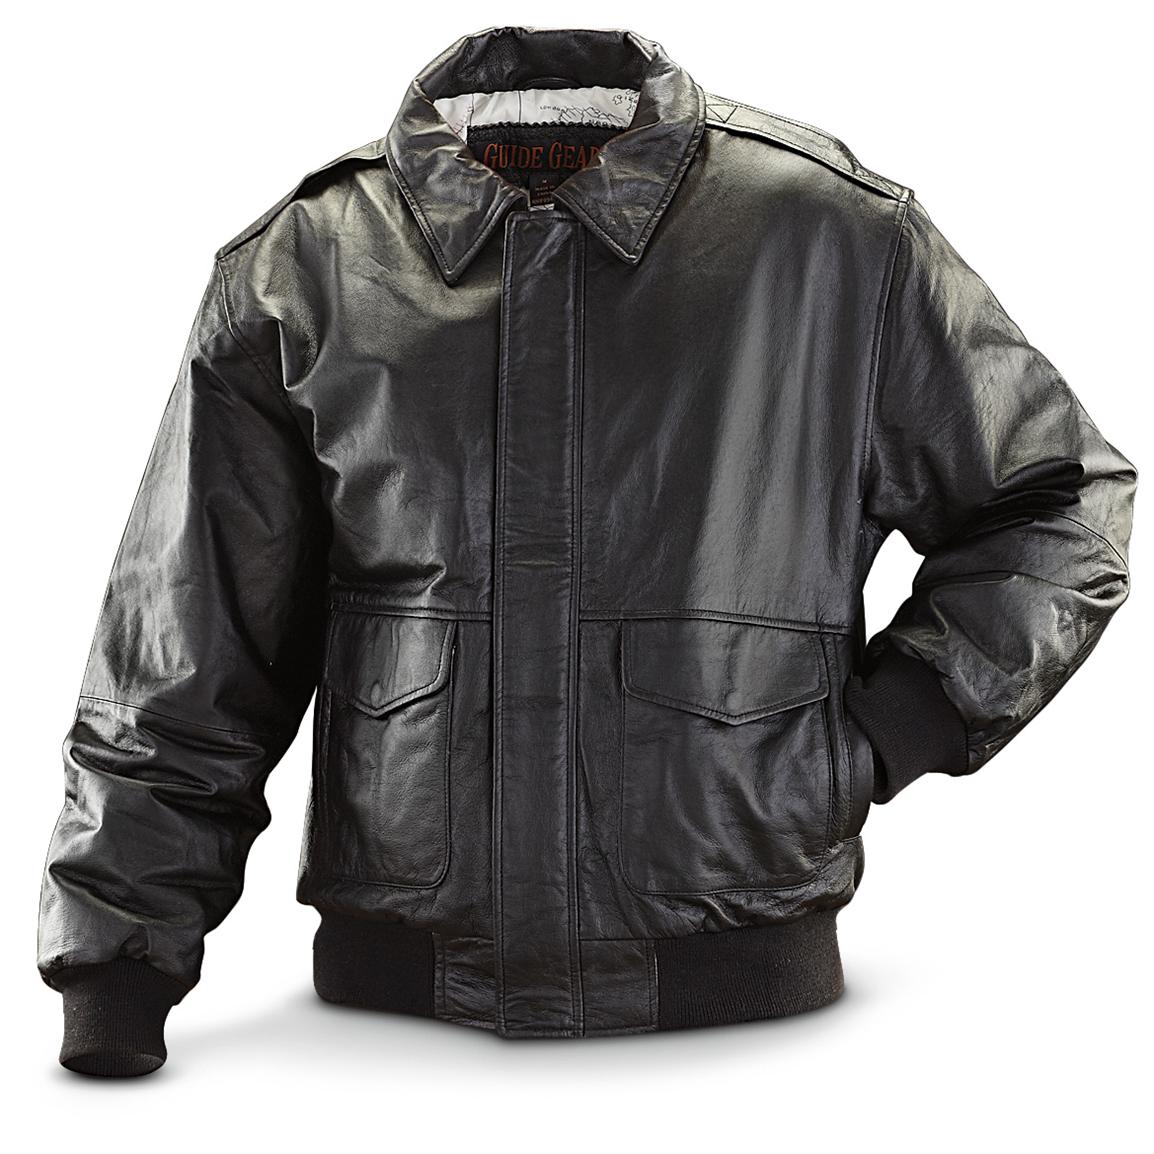 Guide Gear® Nappa Leather Bomber Jacket, Black - 294727, Insulated ...